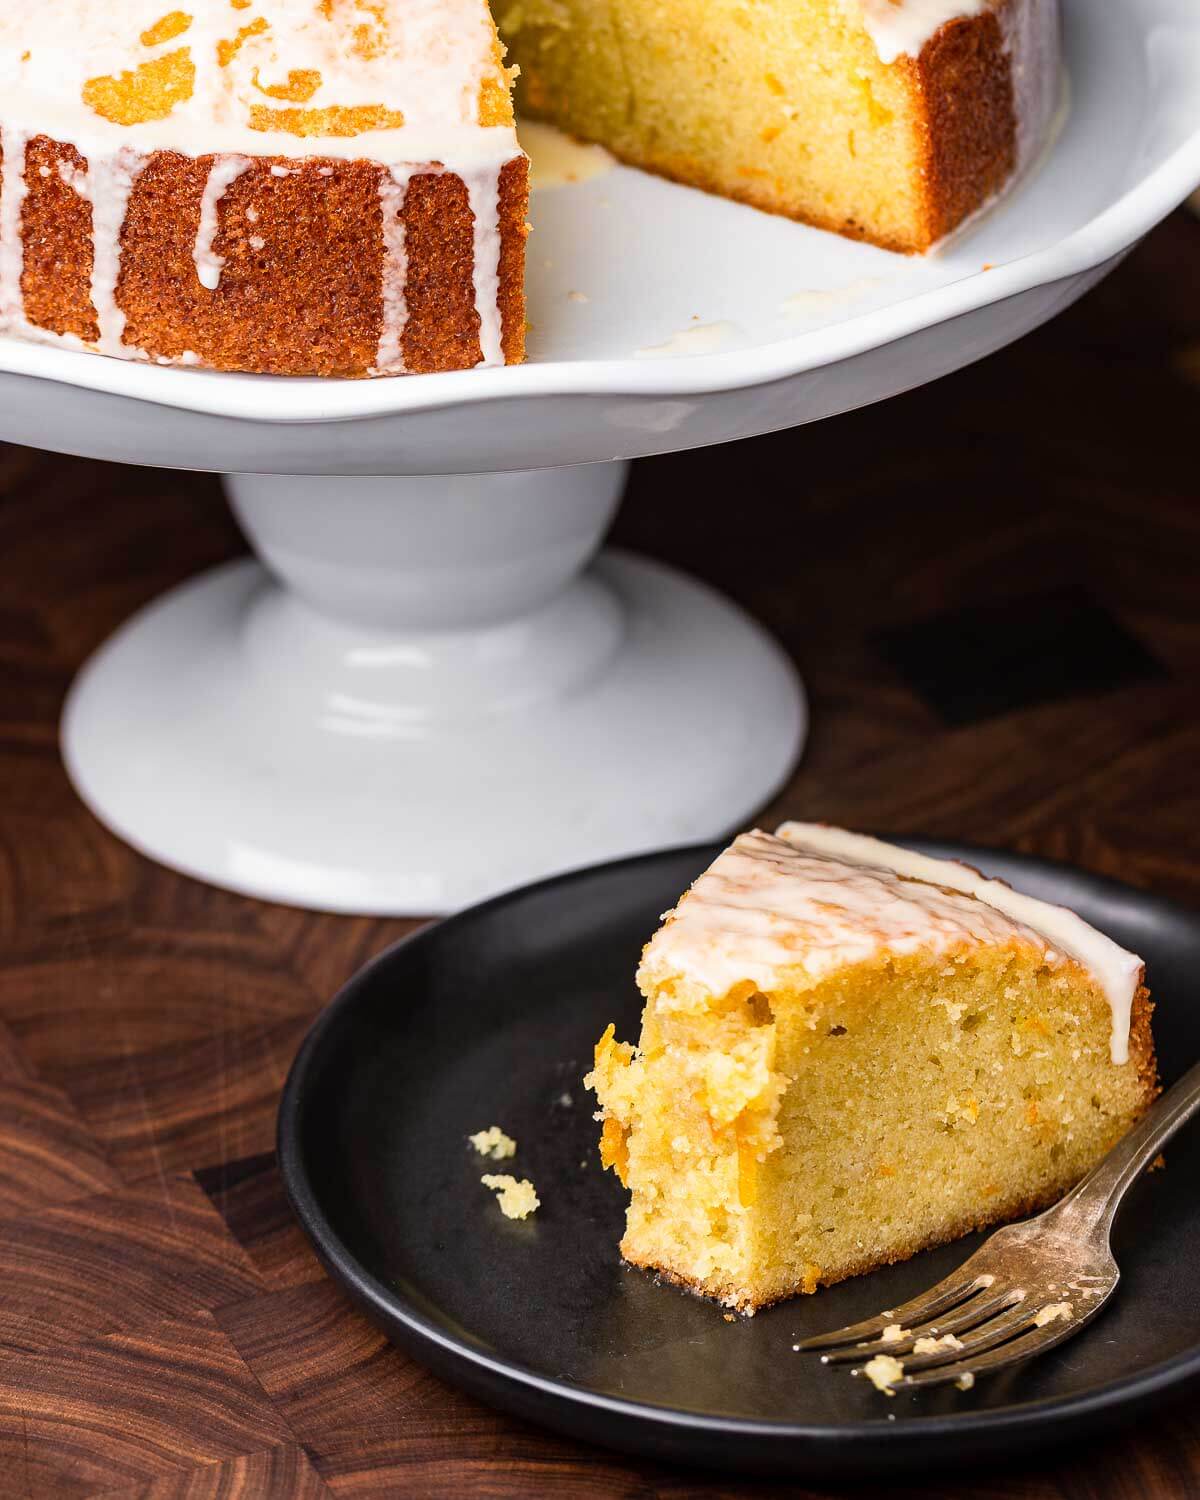 Cut piece of orange olive cake on black plate with cake stand in background.